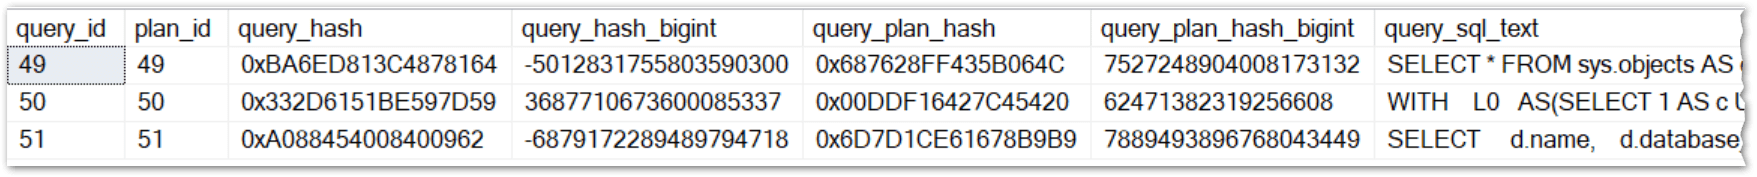 Query Store info with both binary and bigint hashes